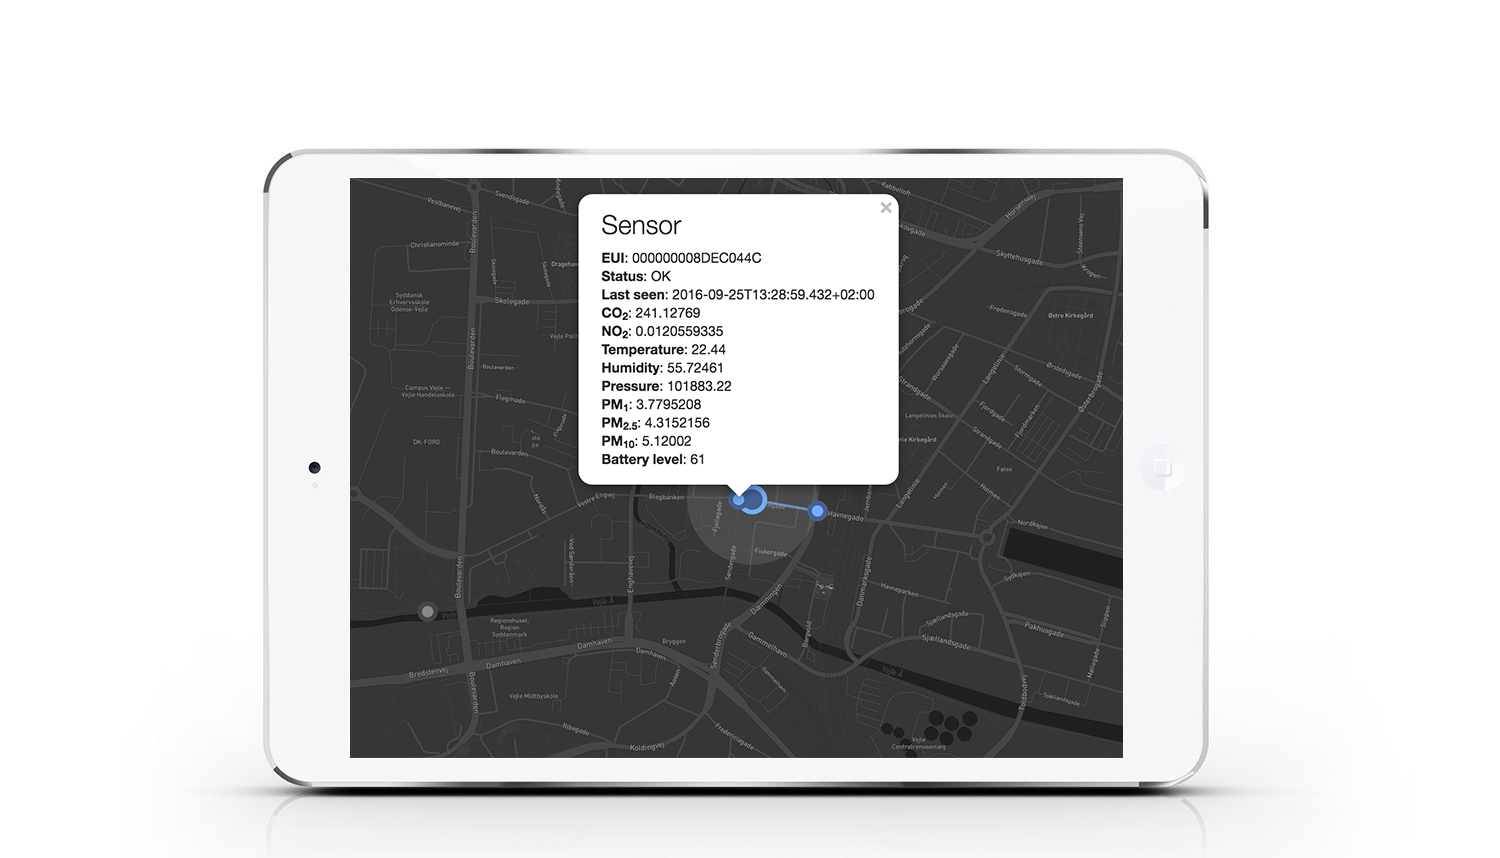 CTT Urban Overview giving information from a node deployed in Vejle